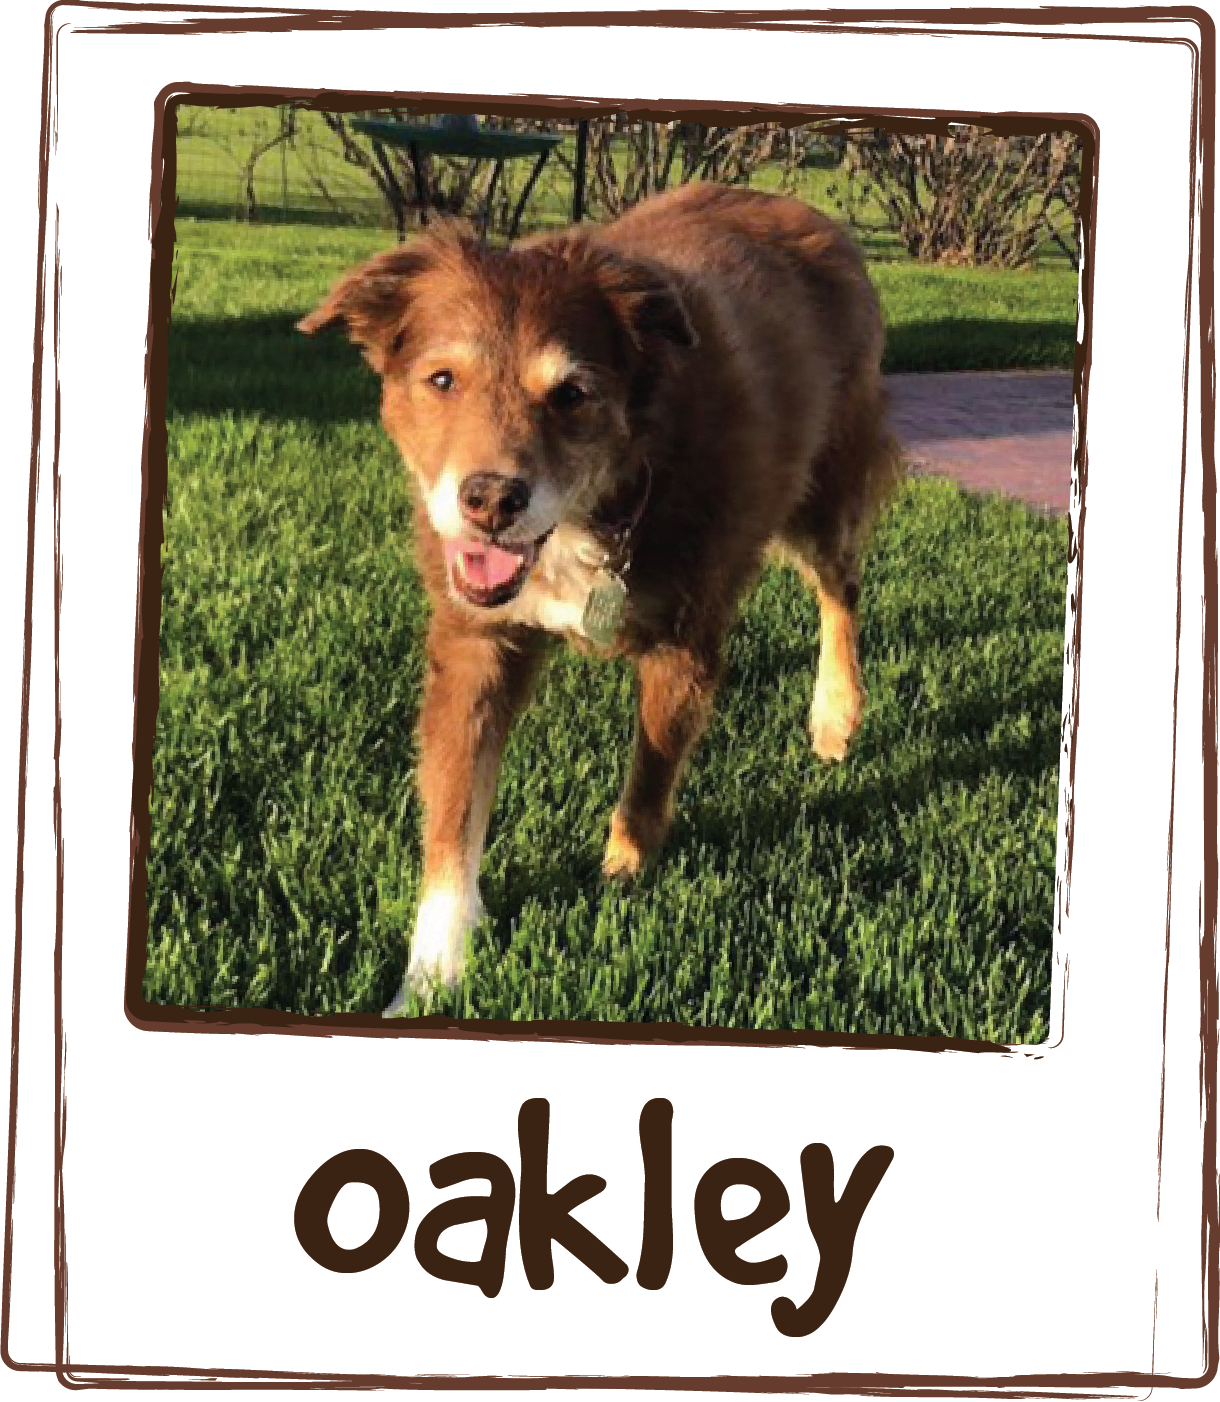  “Oakley will be 14 in November 2022. She has had chronic UTI's most of her life. I found a urinary supplement that controlled them well for years &amp; years, but that was discontinued a few years back. After trial &amp; error she had repeat UTIs ag